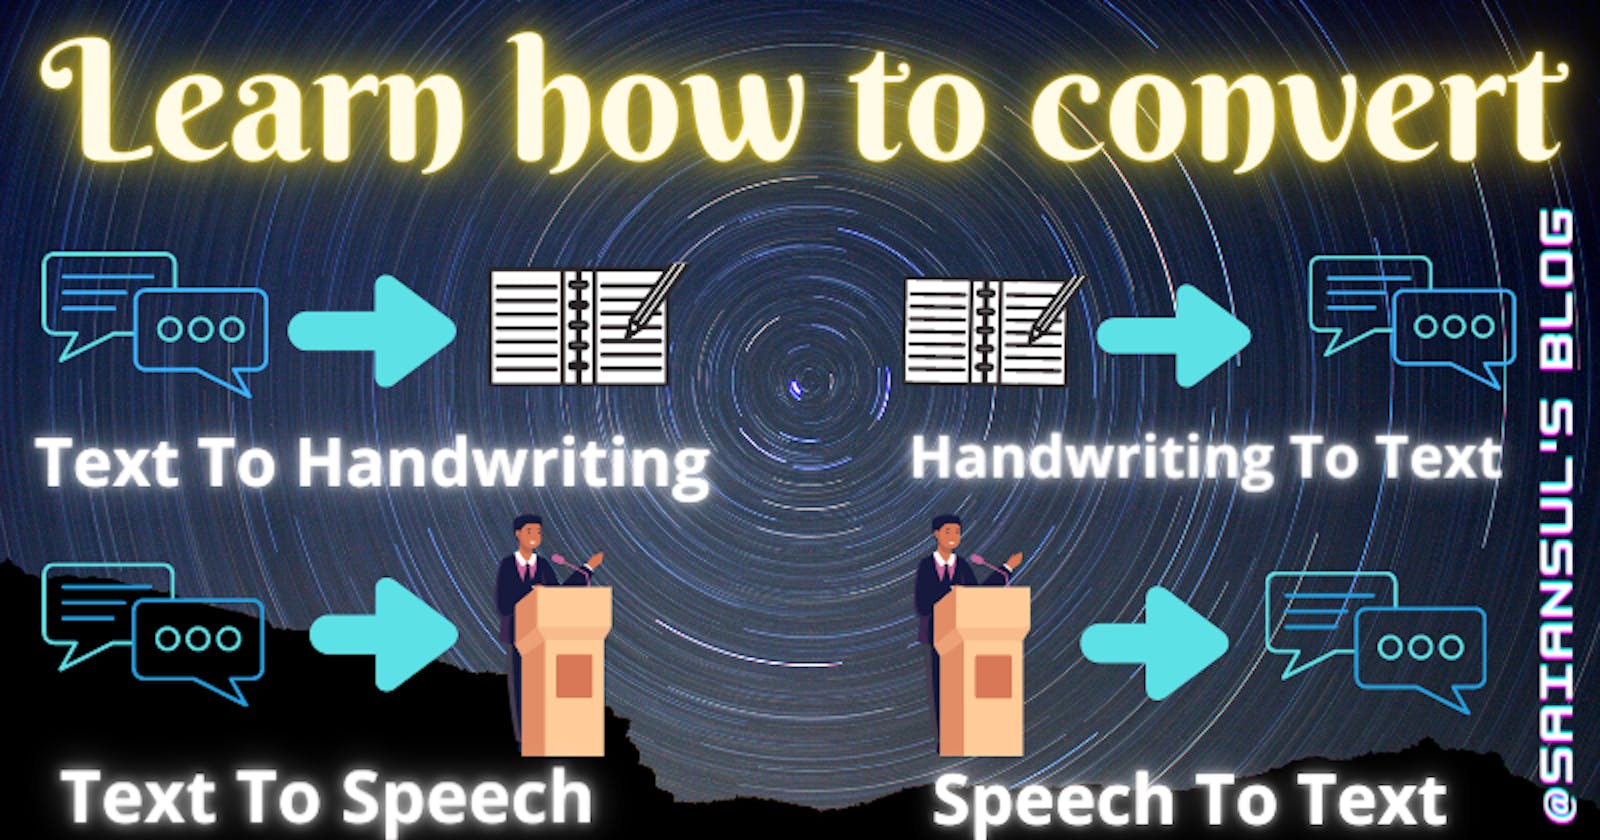 Learn How to Convert: Text to Handwriting, Handwriting to Text, Text to Speech & Speech to Text